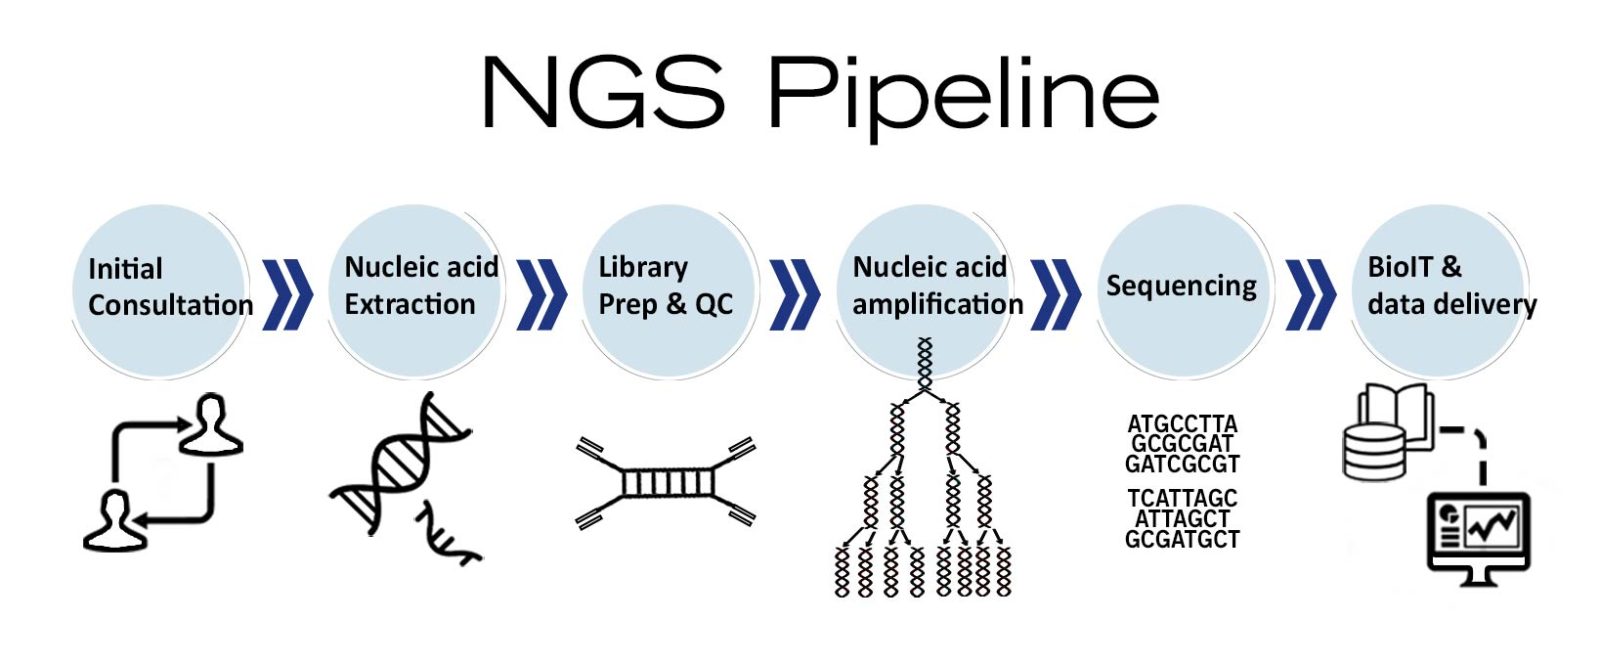 Ngs. Анализ NGS. NGS- данные. NGS (next Generation sequencing). NGS секвенирование.